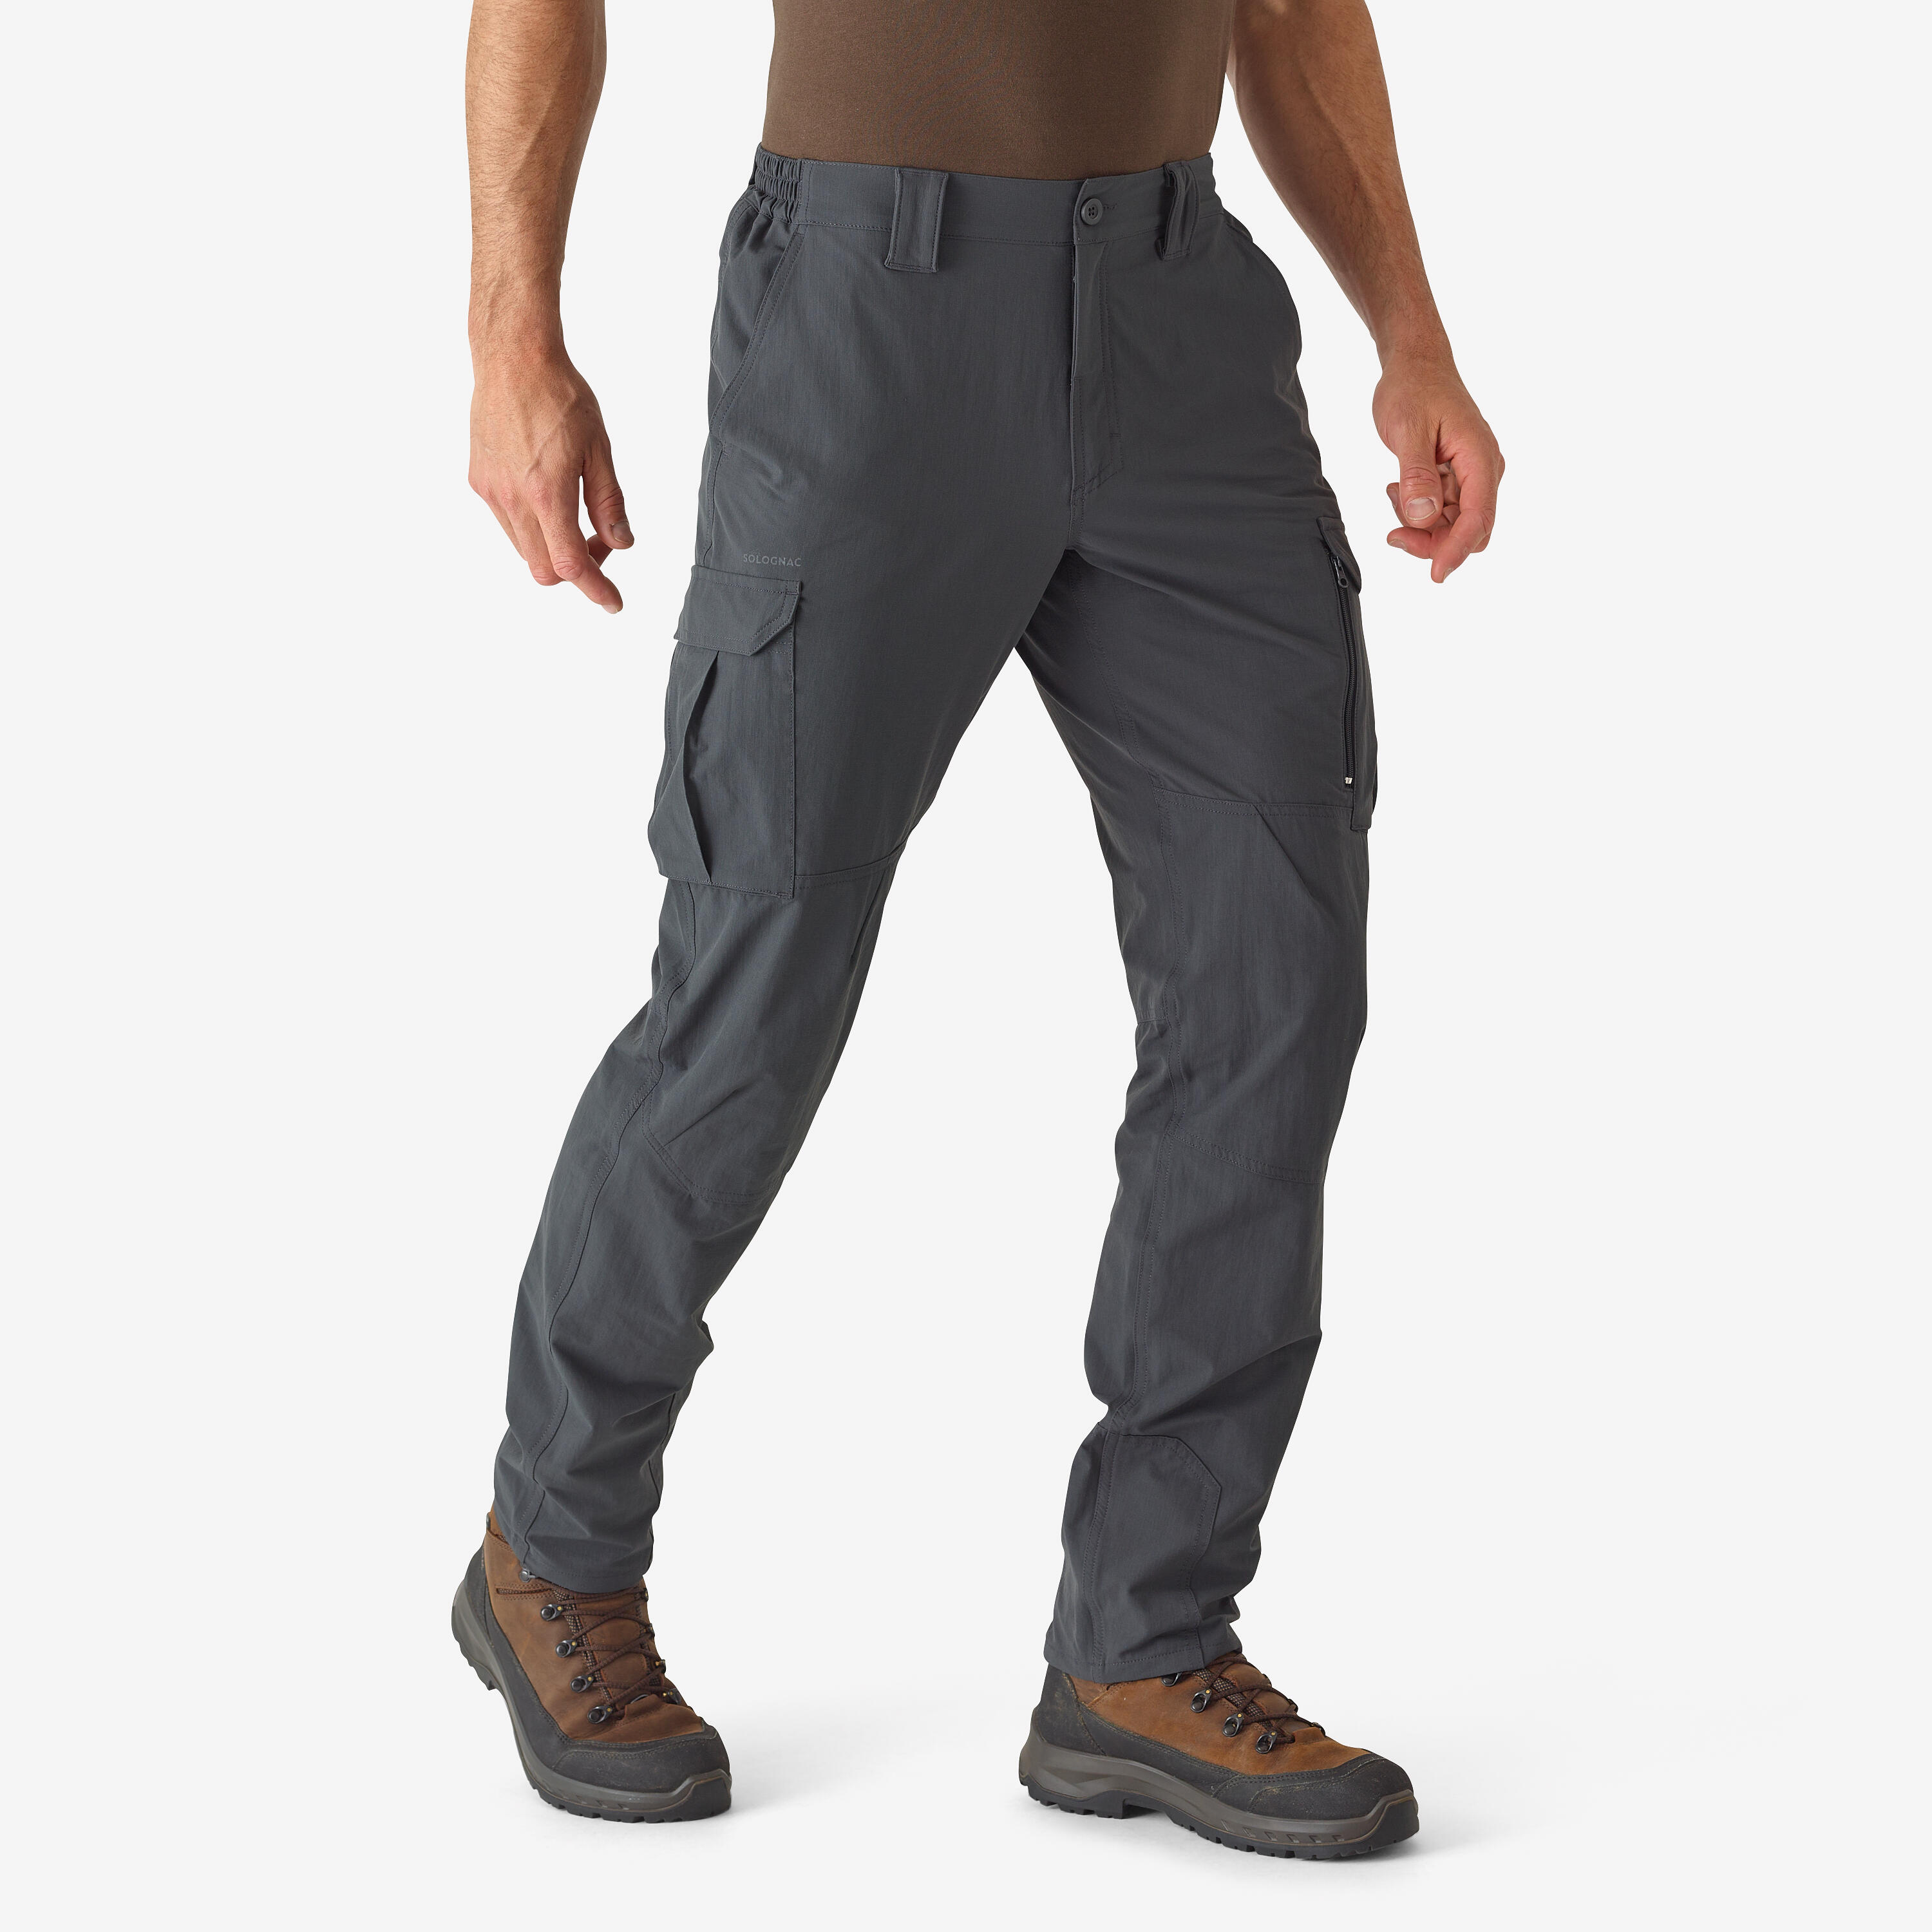 SOLOGNAC LIGHT AND BREATHABLE TROUSERS 500 GREY